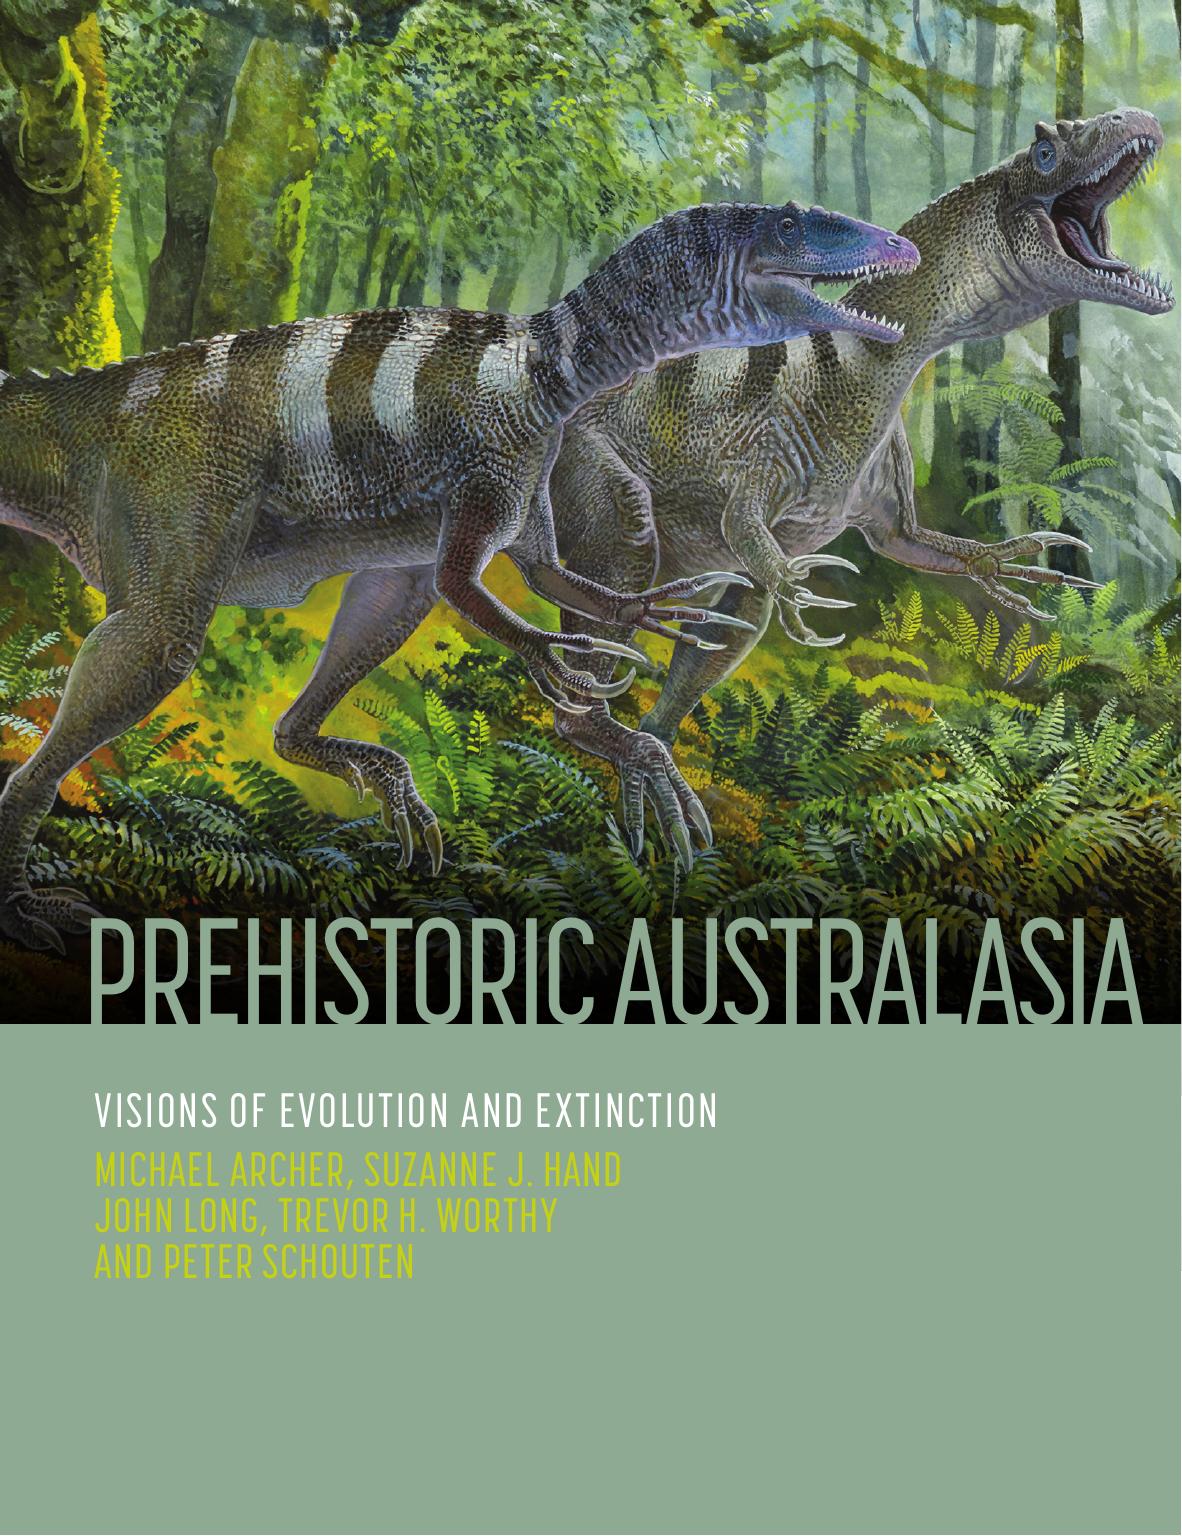 Prehistoric Australasia: Visions of Evolution and Extinction by Michael Archer Suzanne J. Hand John Long Trevor H. Worthy